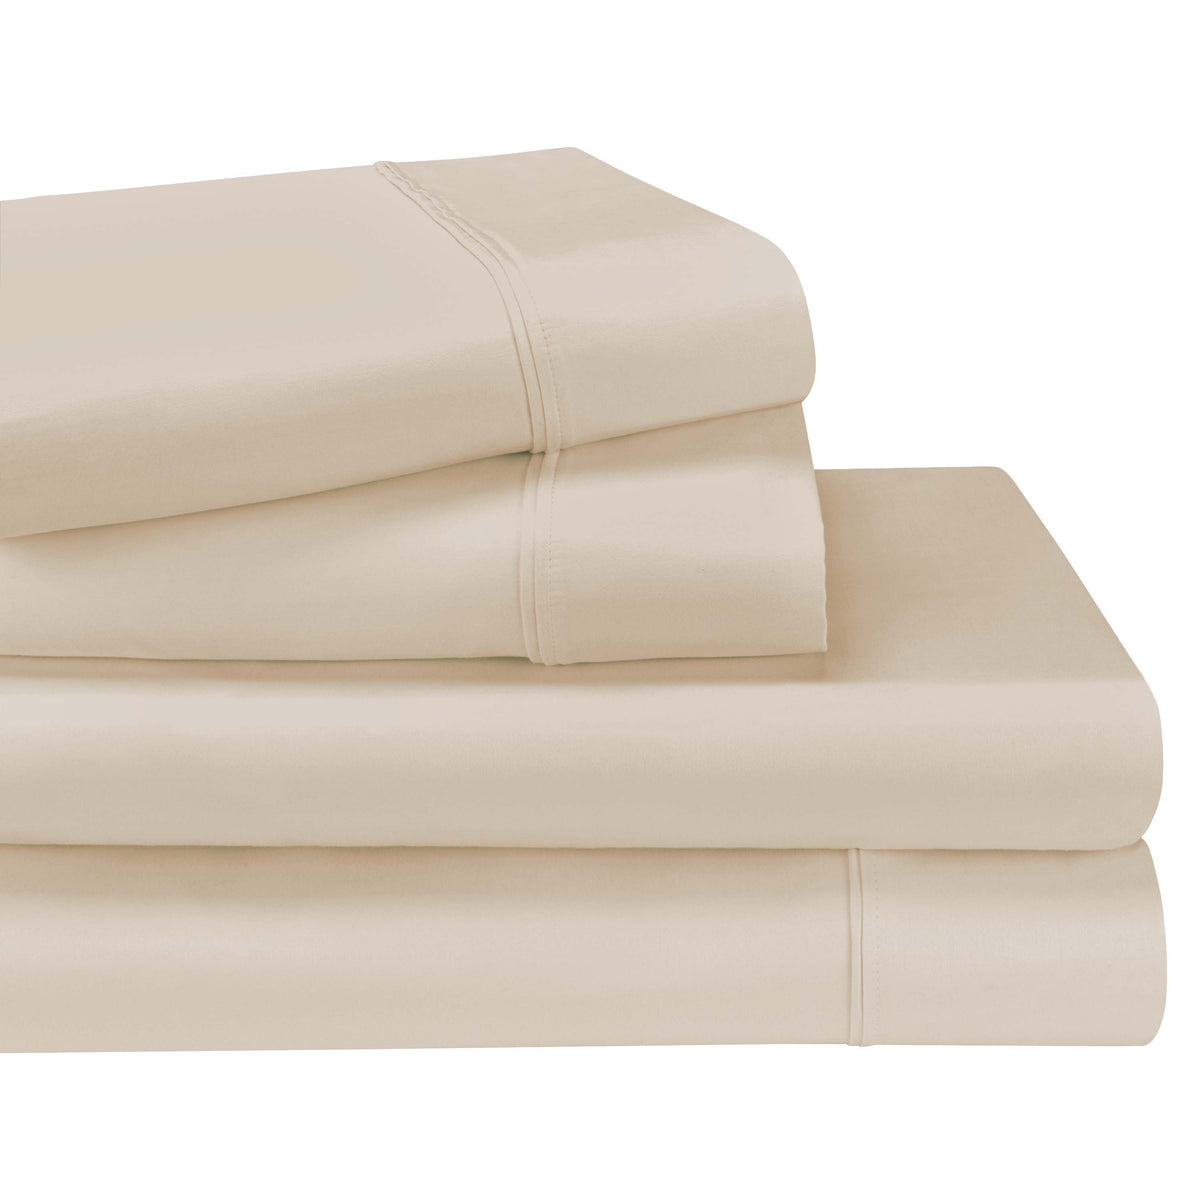 Egyptian Cotton 1200 Thread Count Eco-Friendly Solid Sheet Set - Ivory